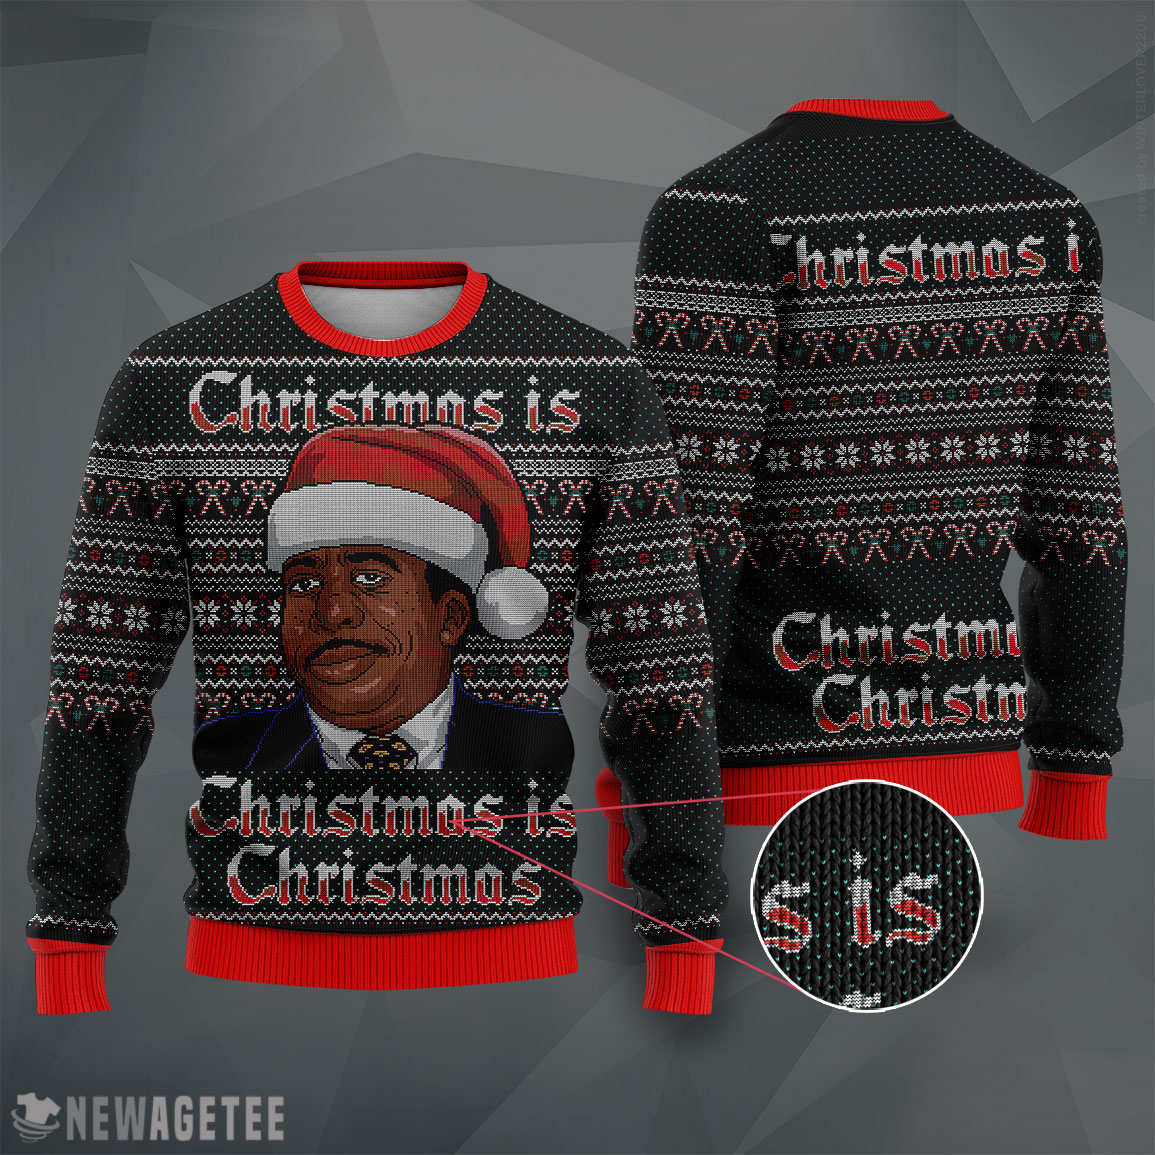 https://newagetee.com/wp-content/uploads/2021/11/Knit-Sweater-Stanley-Hudson-Christmas-is-Christmas-The-Office-Ugly-Christmas-Sweater.jpeg